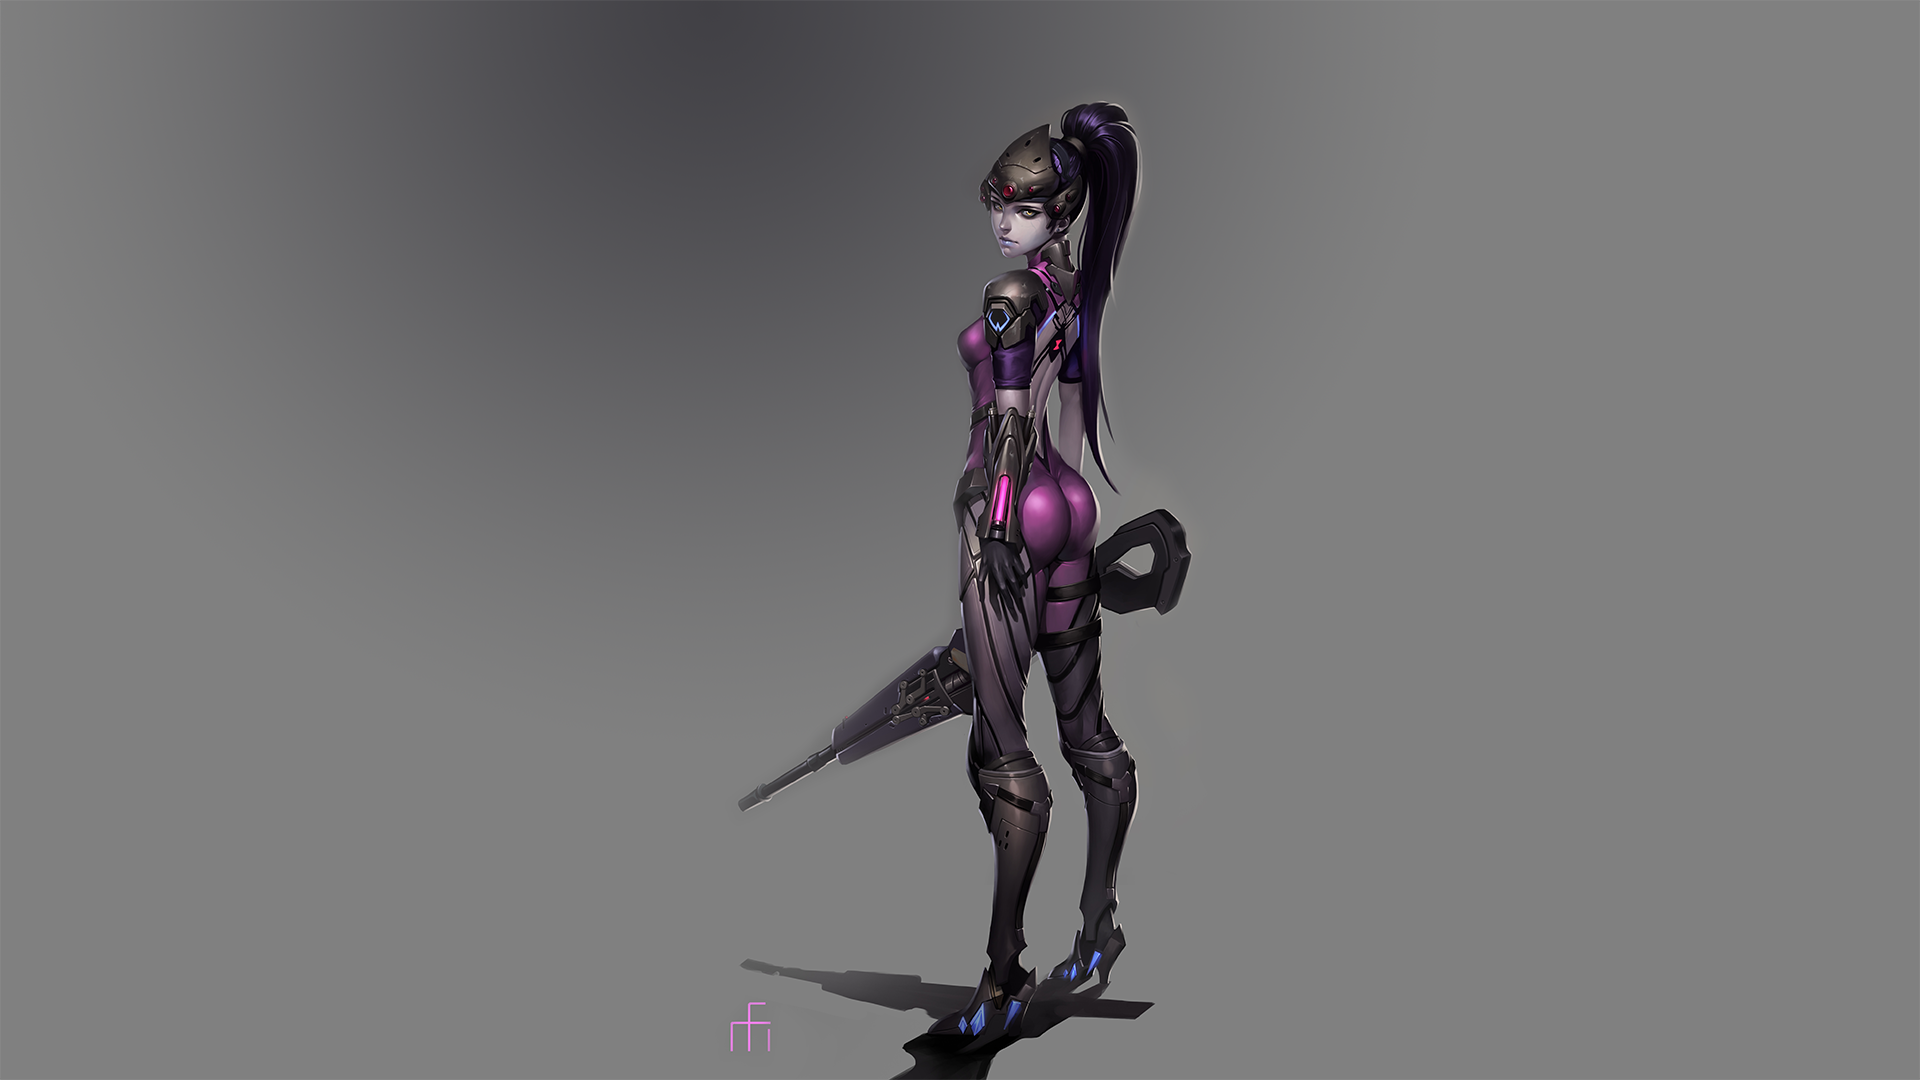 General 1920x1080 Overwatch Widowmaker (Overwatch) ass PC gaming simple background anime anime girls